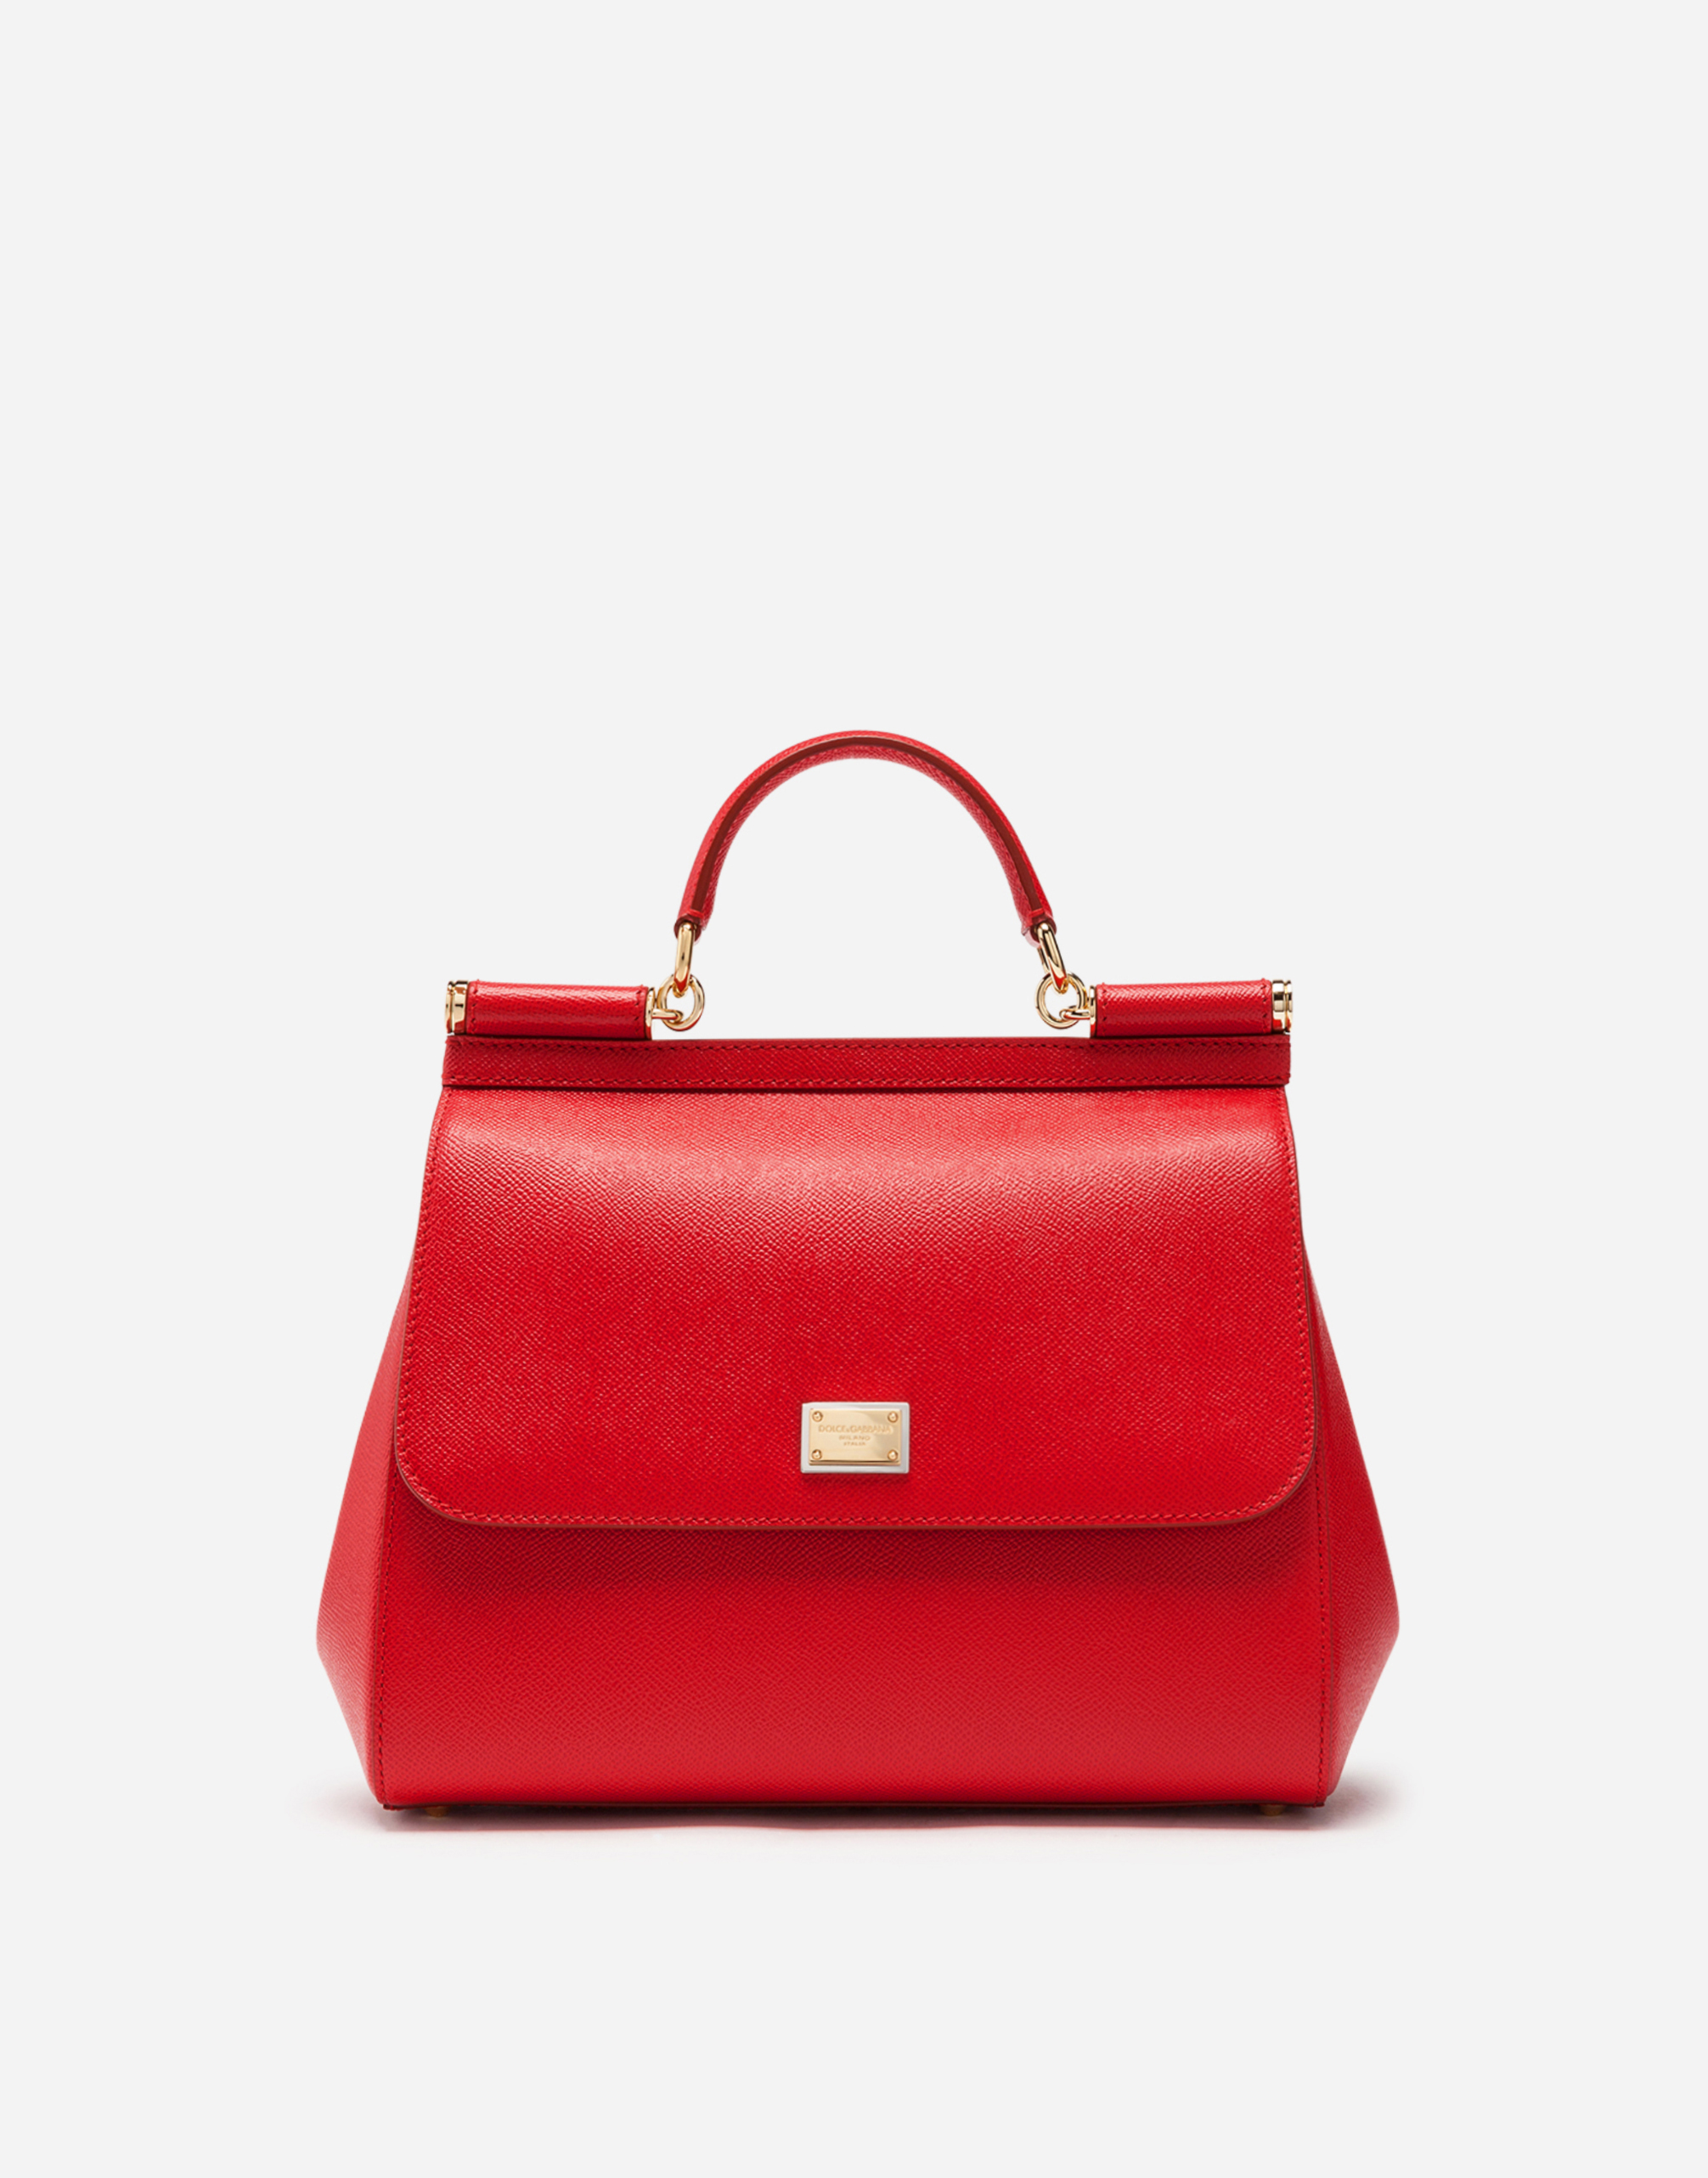 Regular Sicily bag in dauphine leather in Red